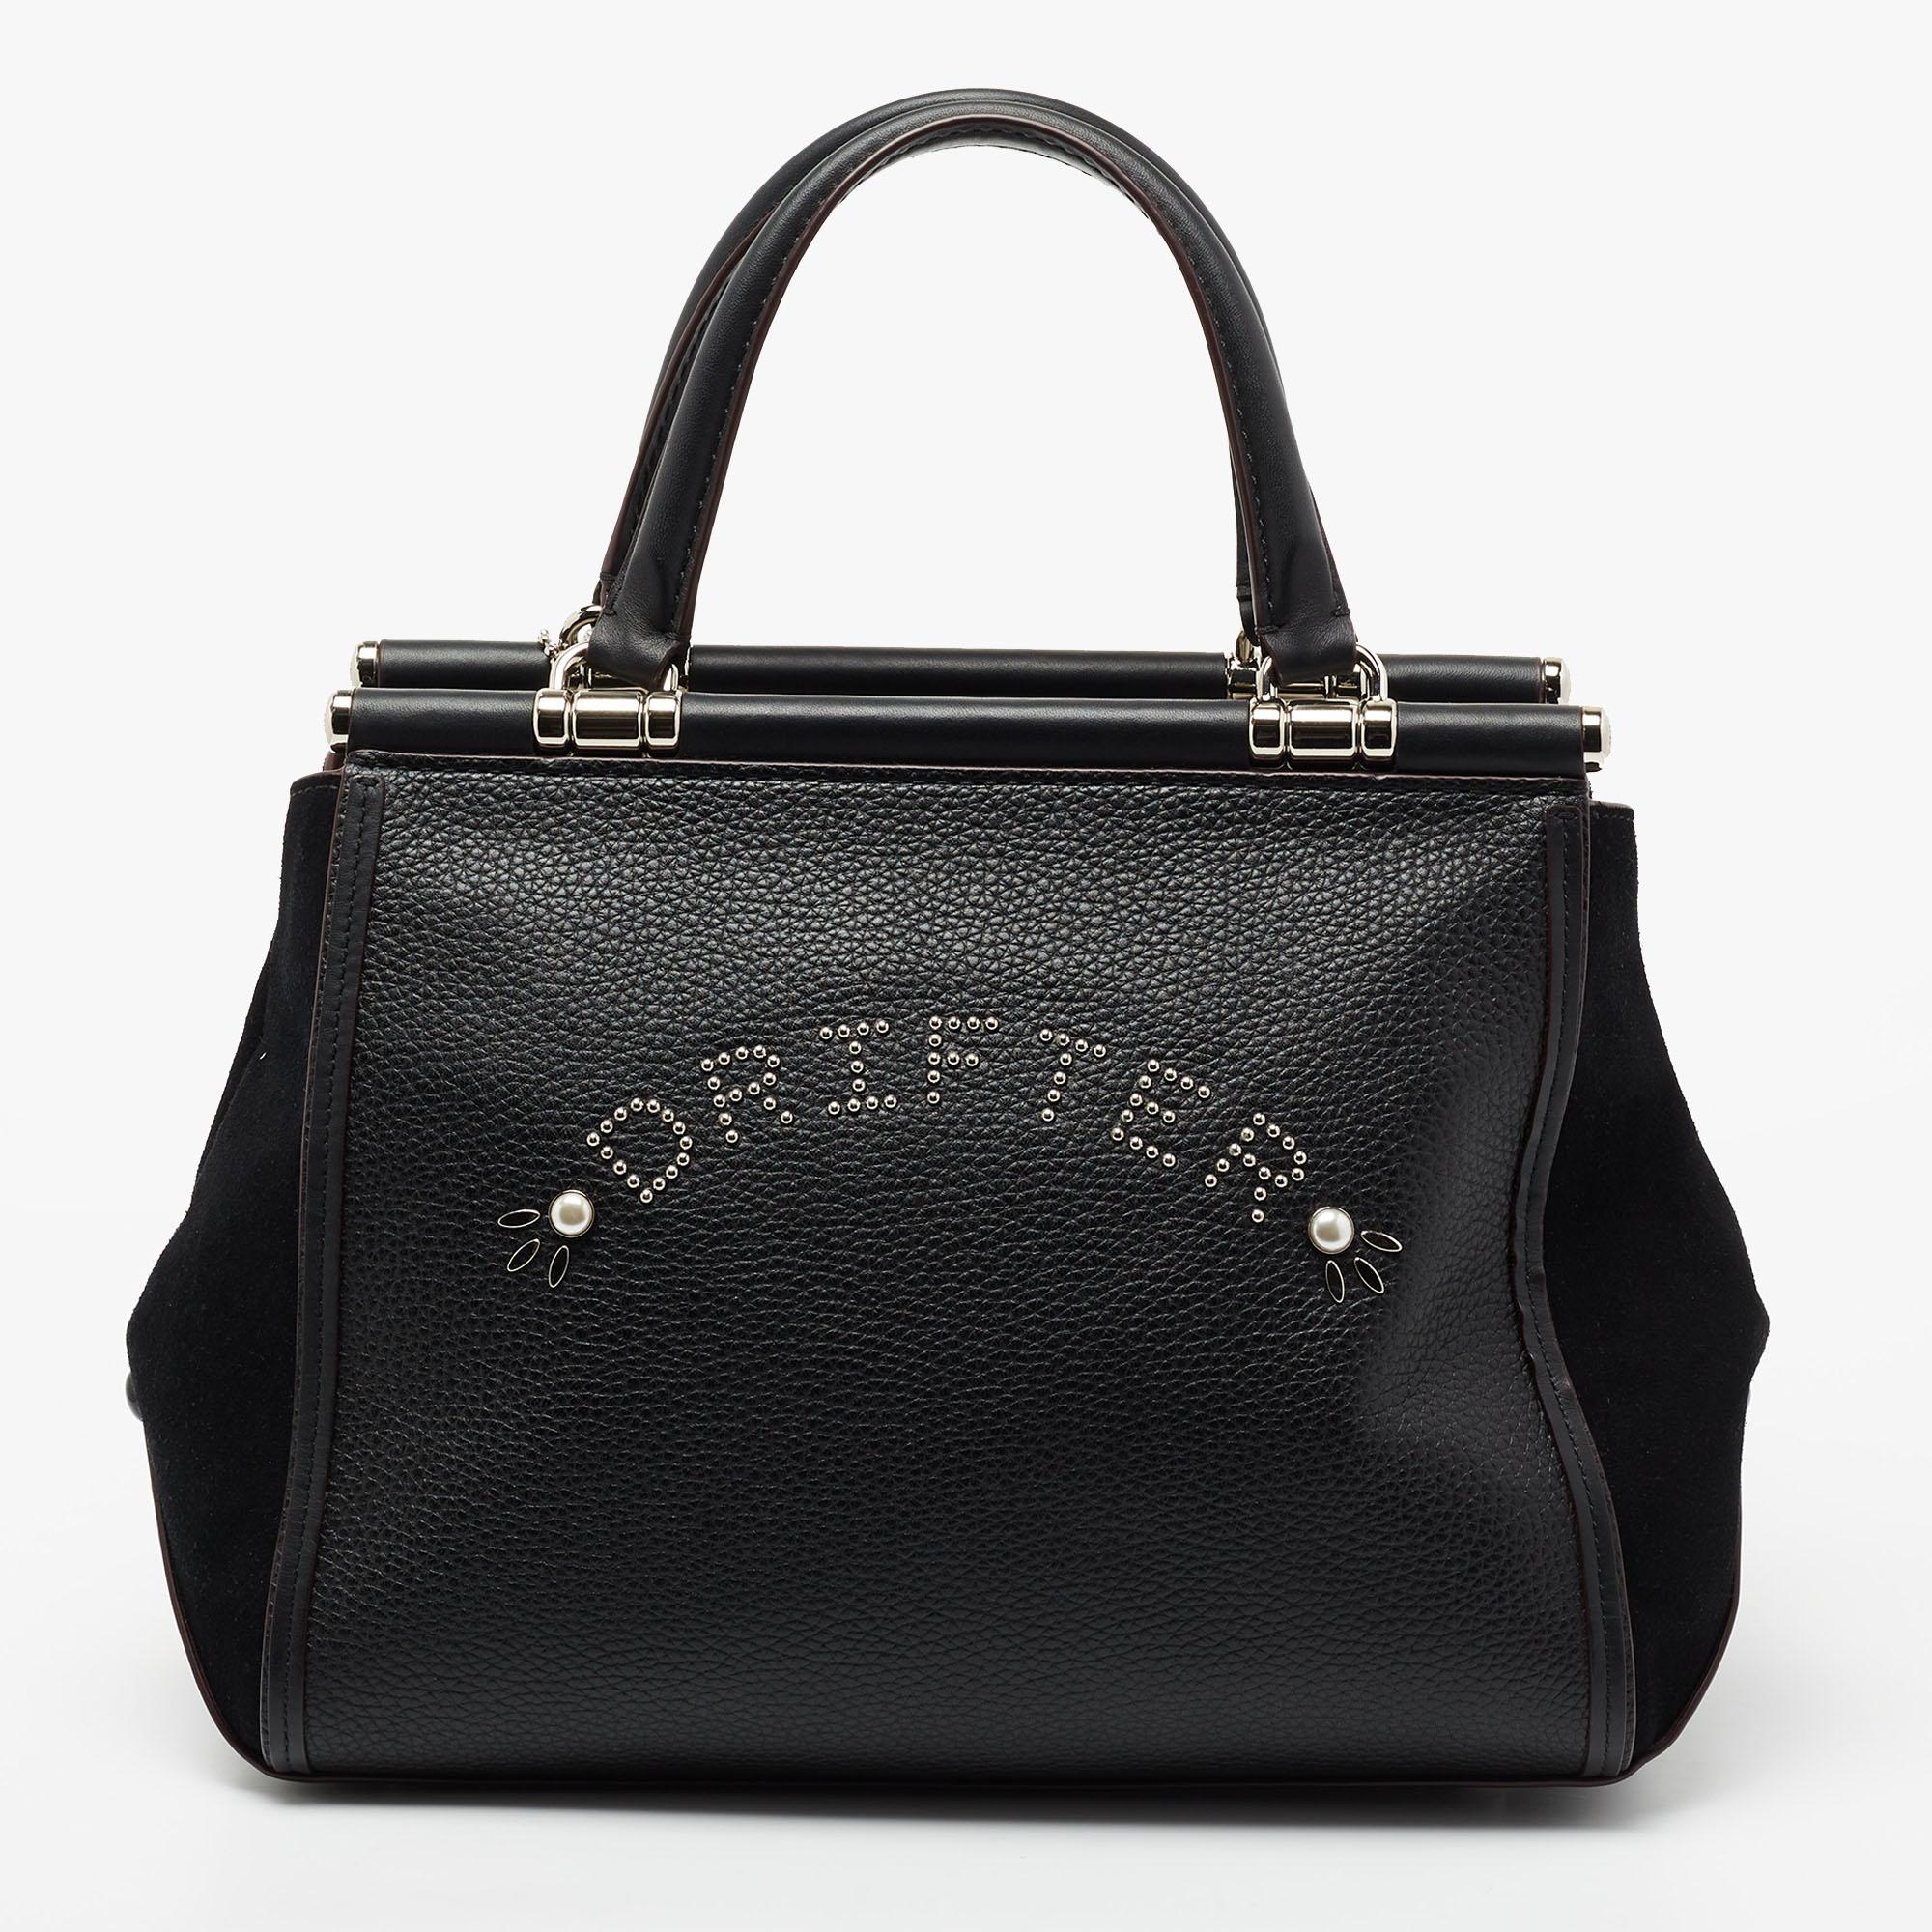 Crafted from leather and suede, this Coach Drifter satchel is gorgeous and functional. It carries a black exterior enhanced with studded embellishments and has a spacious interior sized to carry your essentials. The artistic bag is equipped with